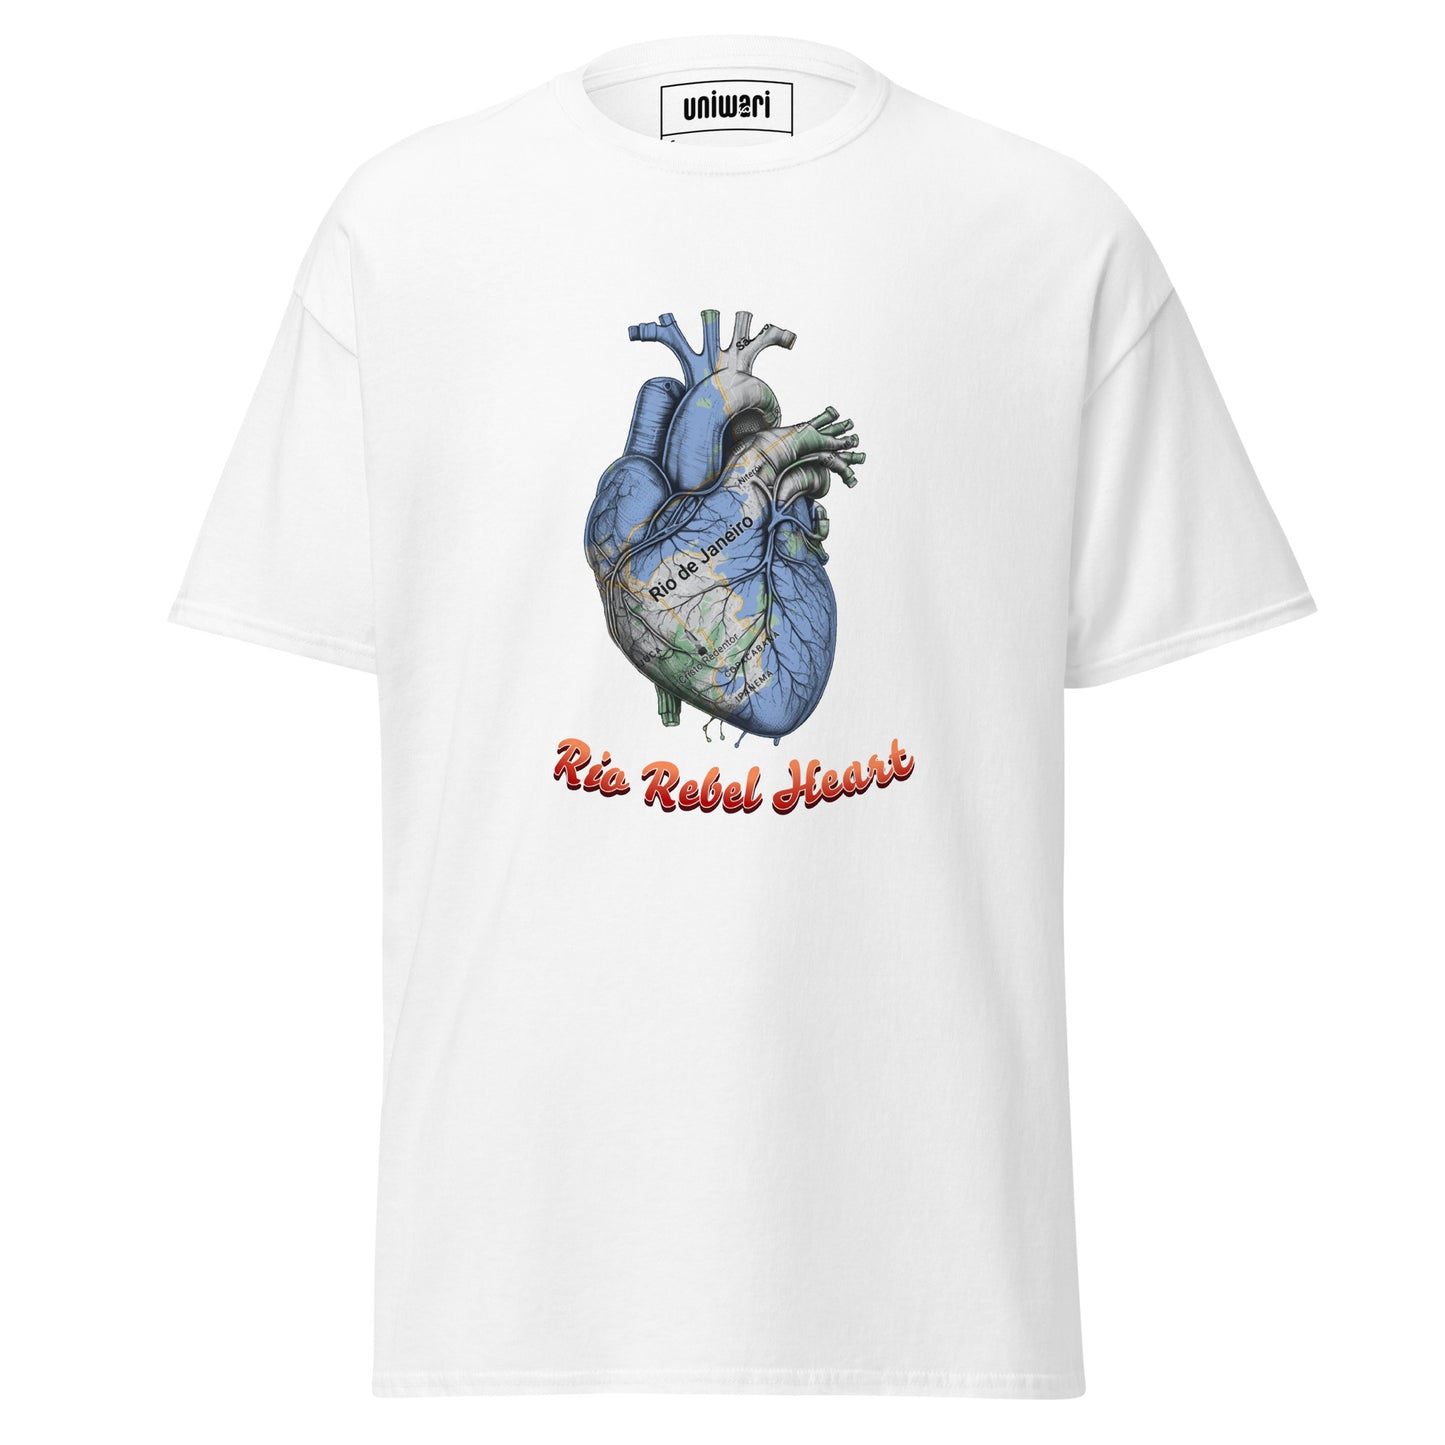 White High Quality Tee - Front Design with a Heart Shaped Map of Rio de Janeiro and a Phrase "Rio Rebel Heart" print